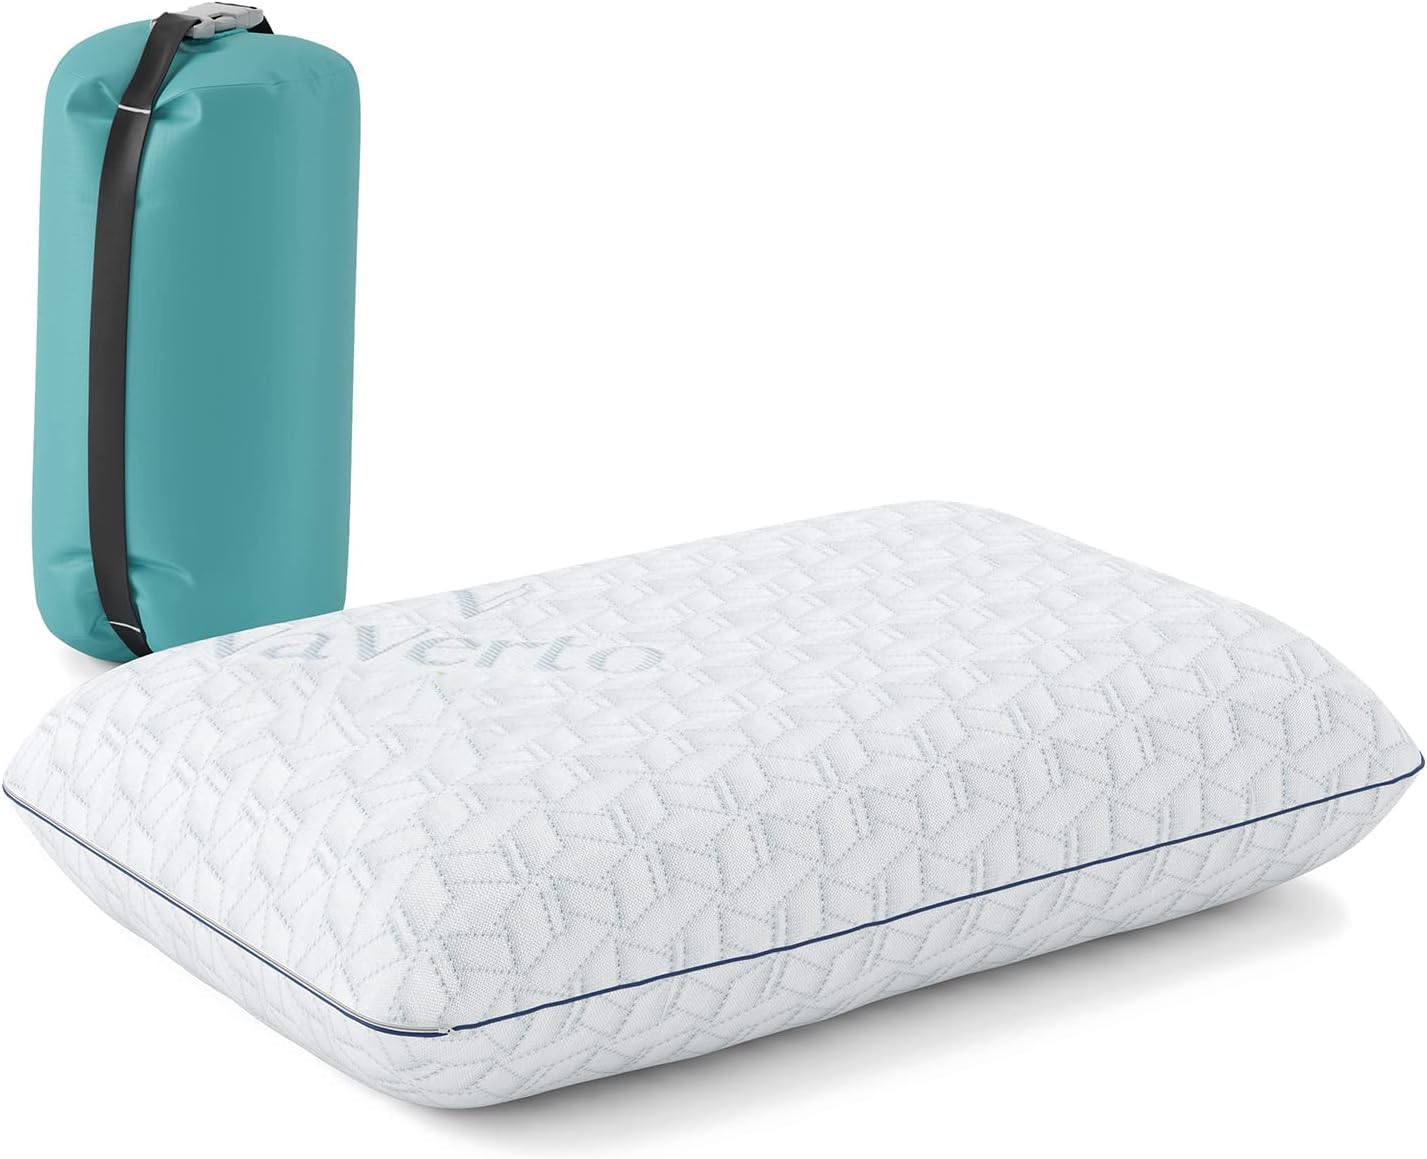 Small Memory Foam Pillow for Travel-The Best Gifts For Travelers